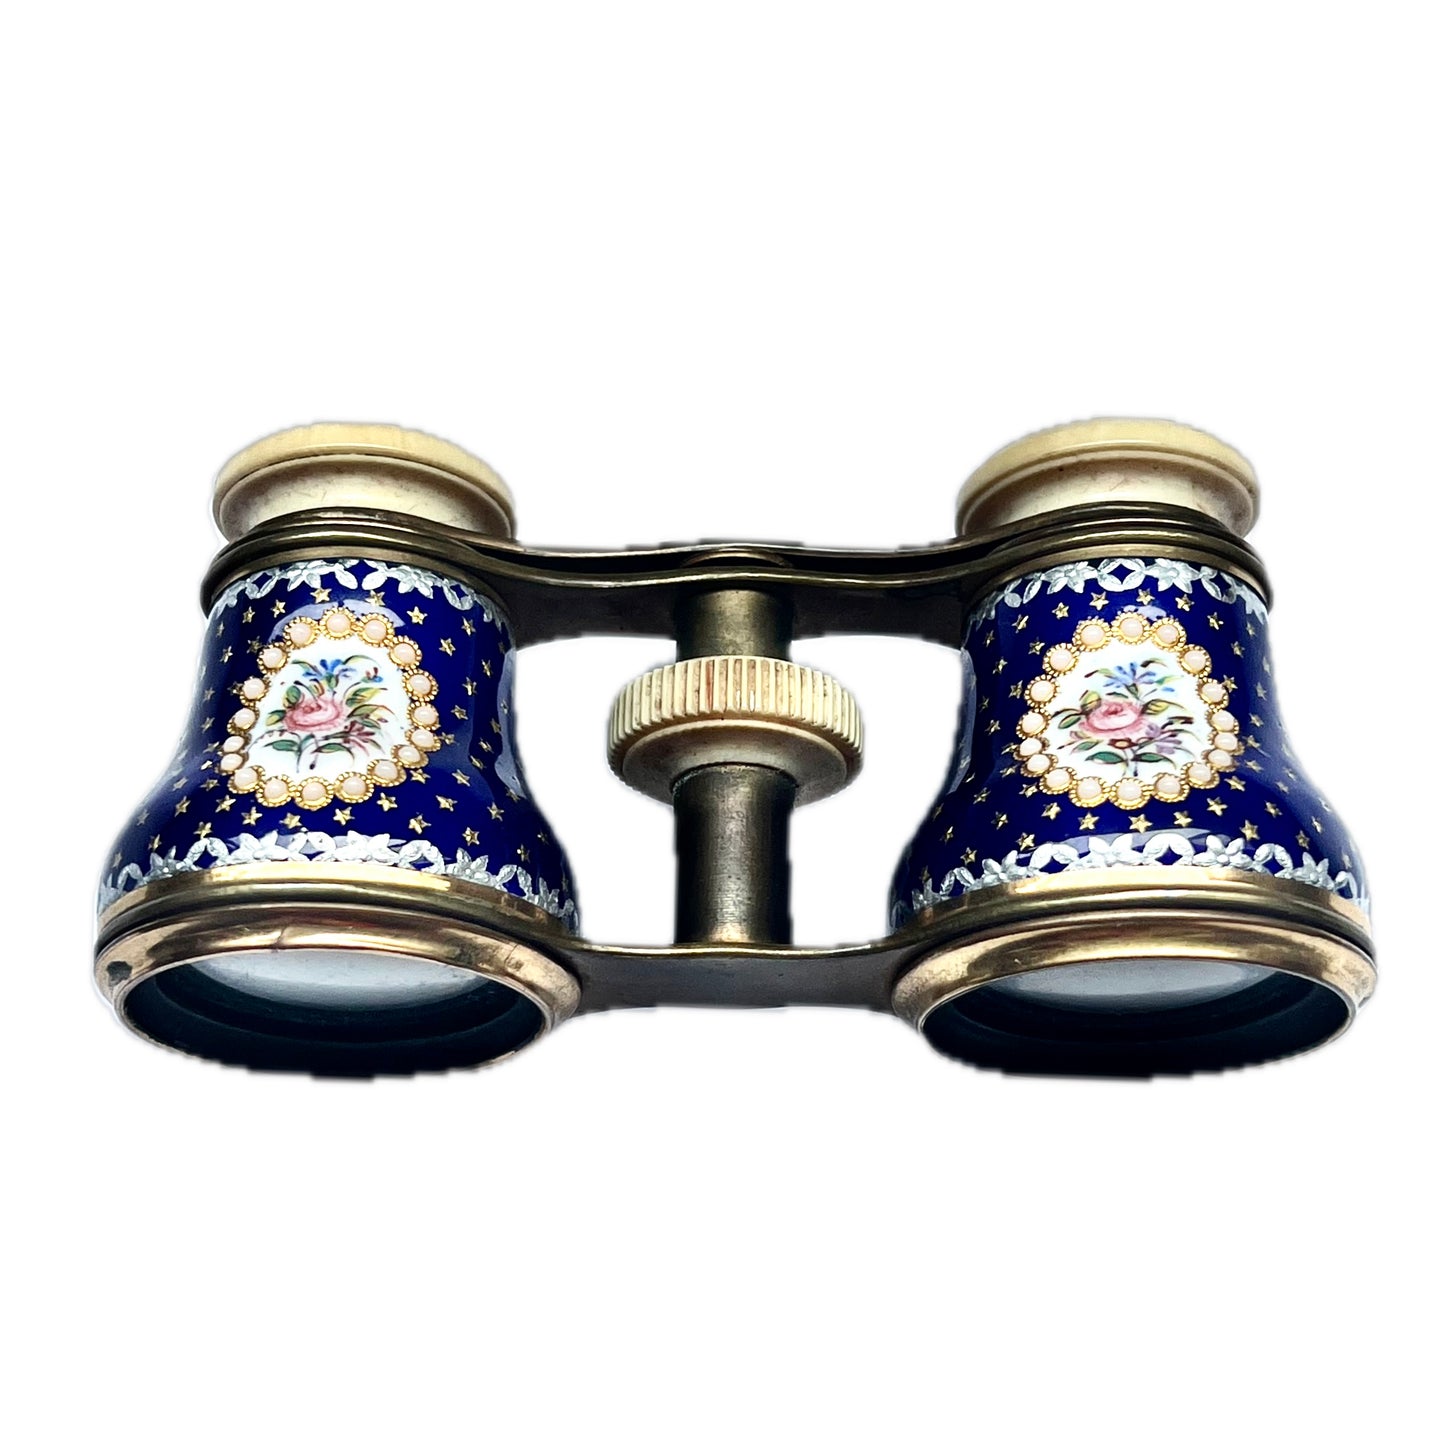 A beautiful 19th century pair of French opera glasses, enamelled florals and brass in original case